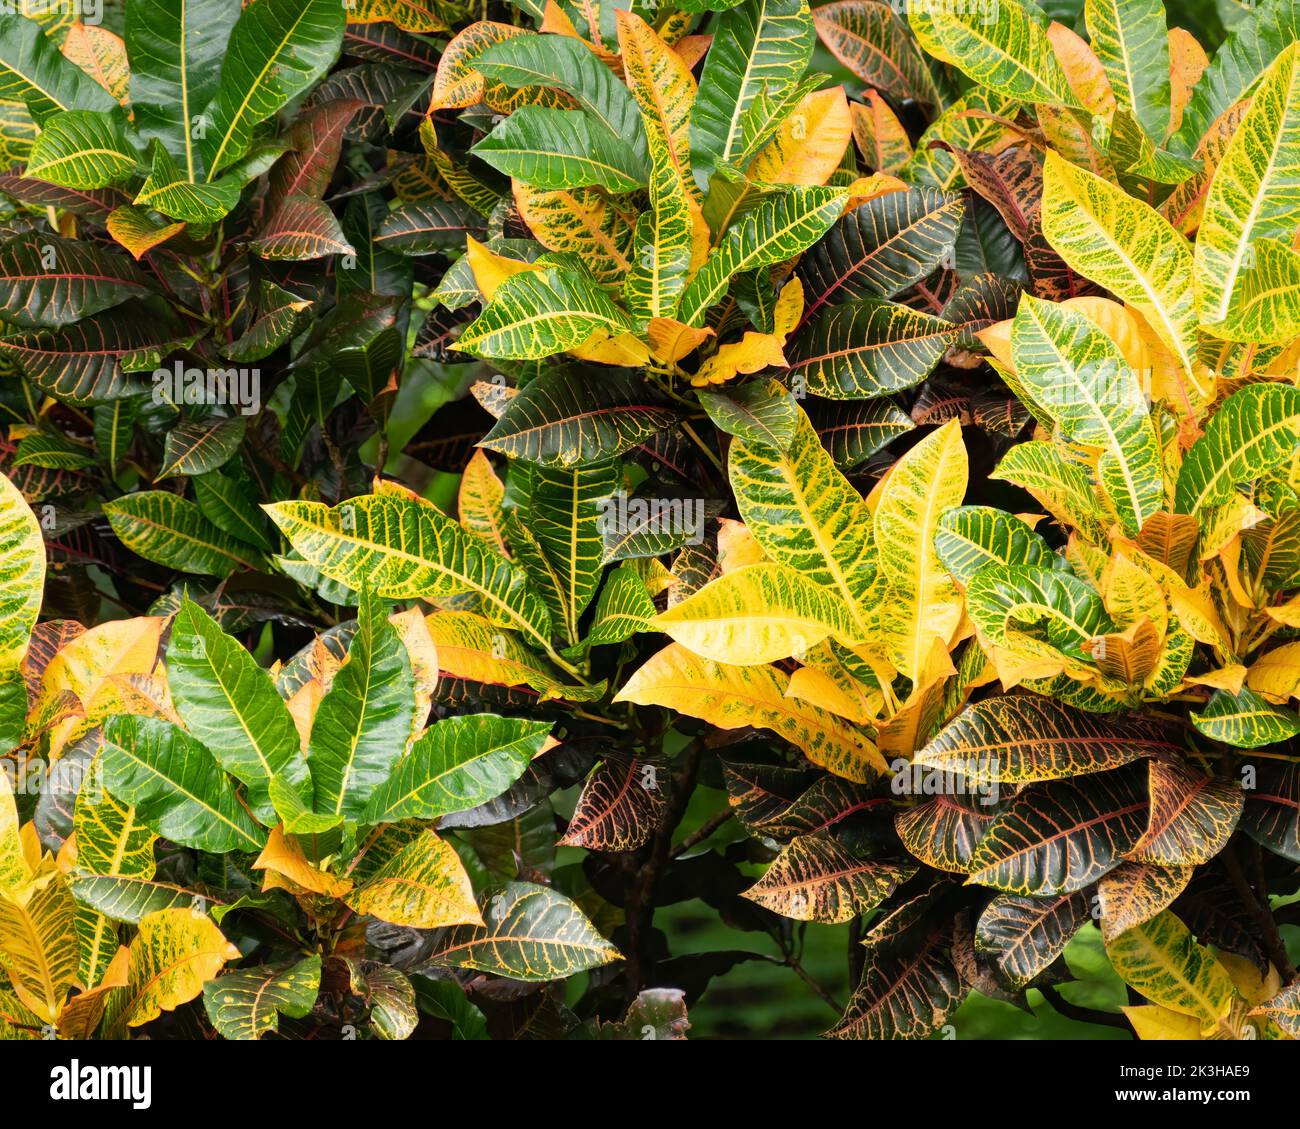 Close-up of a multi-colored Codiaeum variegatum croton plant with large colorful leaves in natural sunlight in the garden. Stock Photo